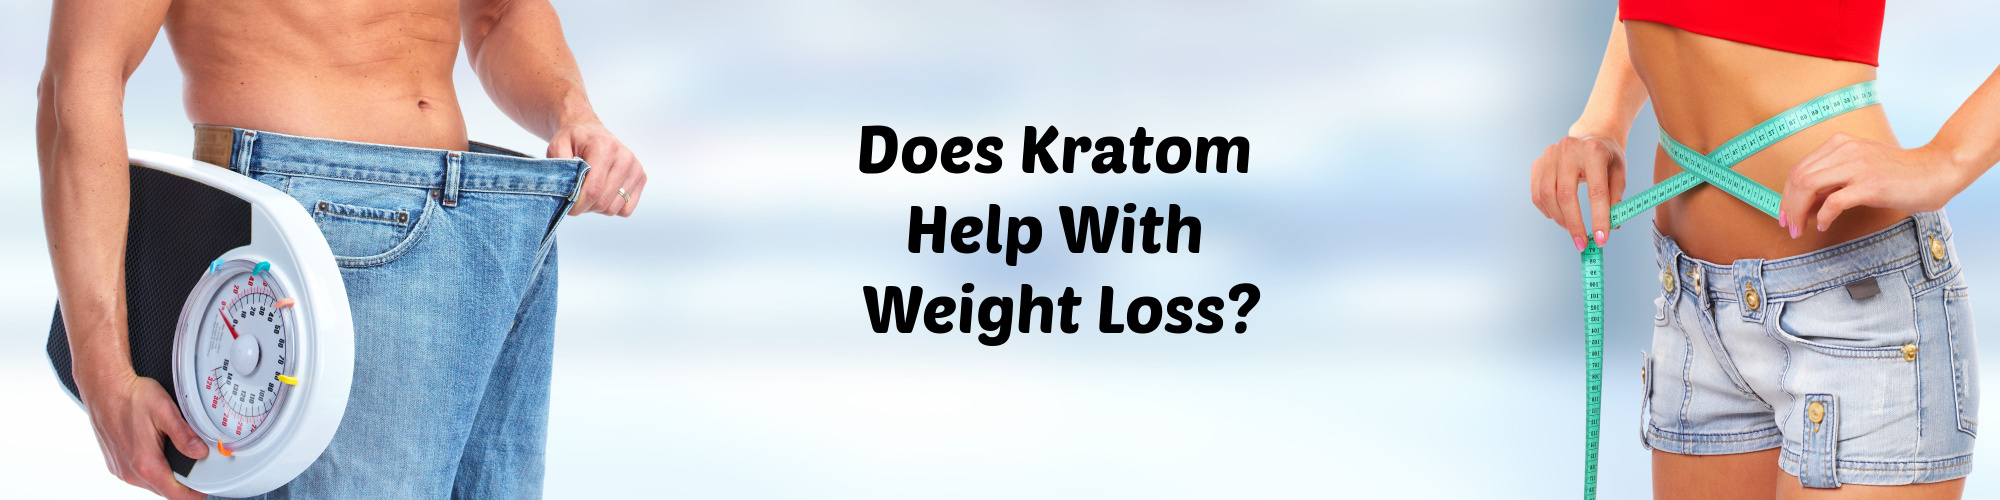 image of does kratom help with weight loss